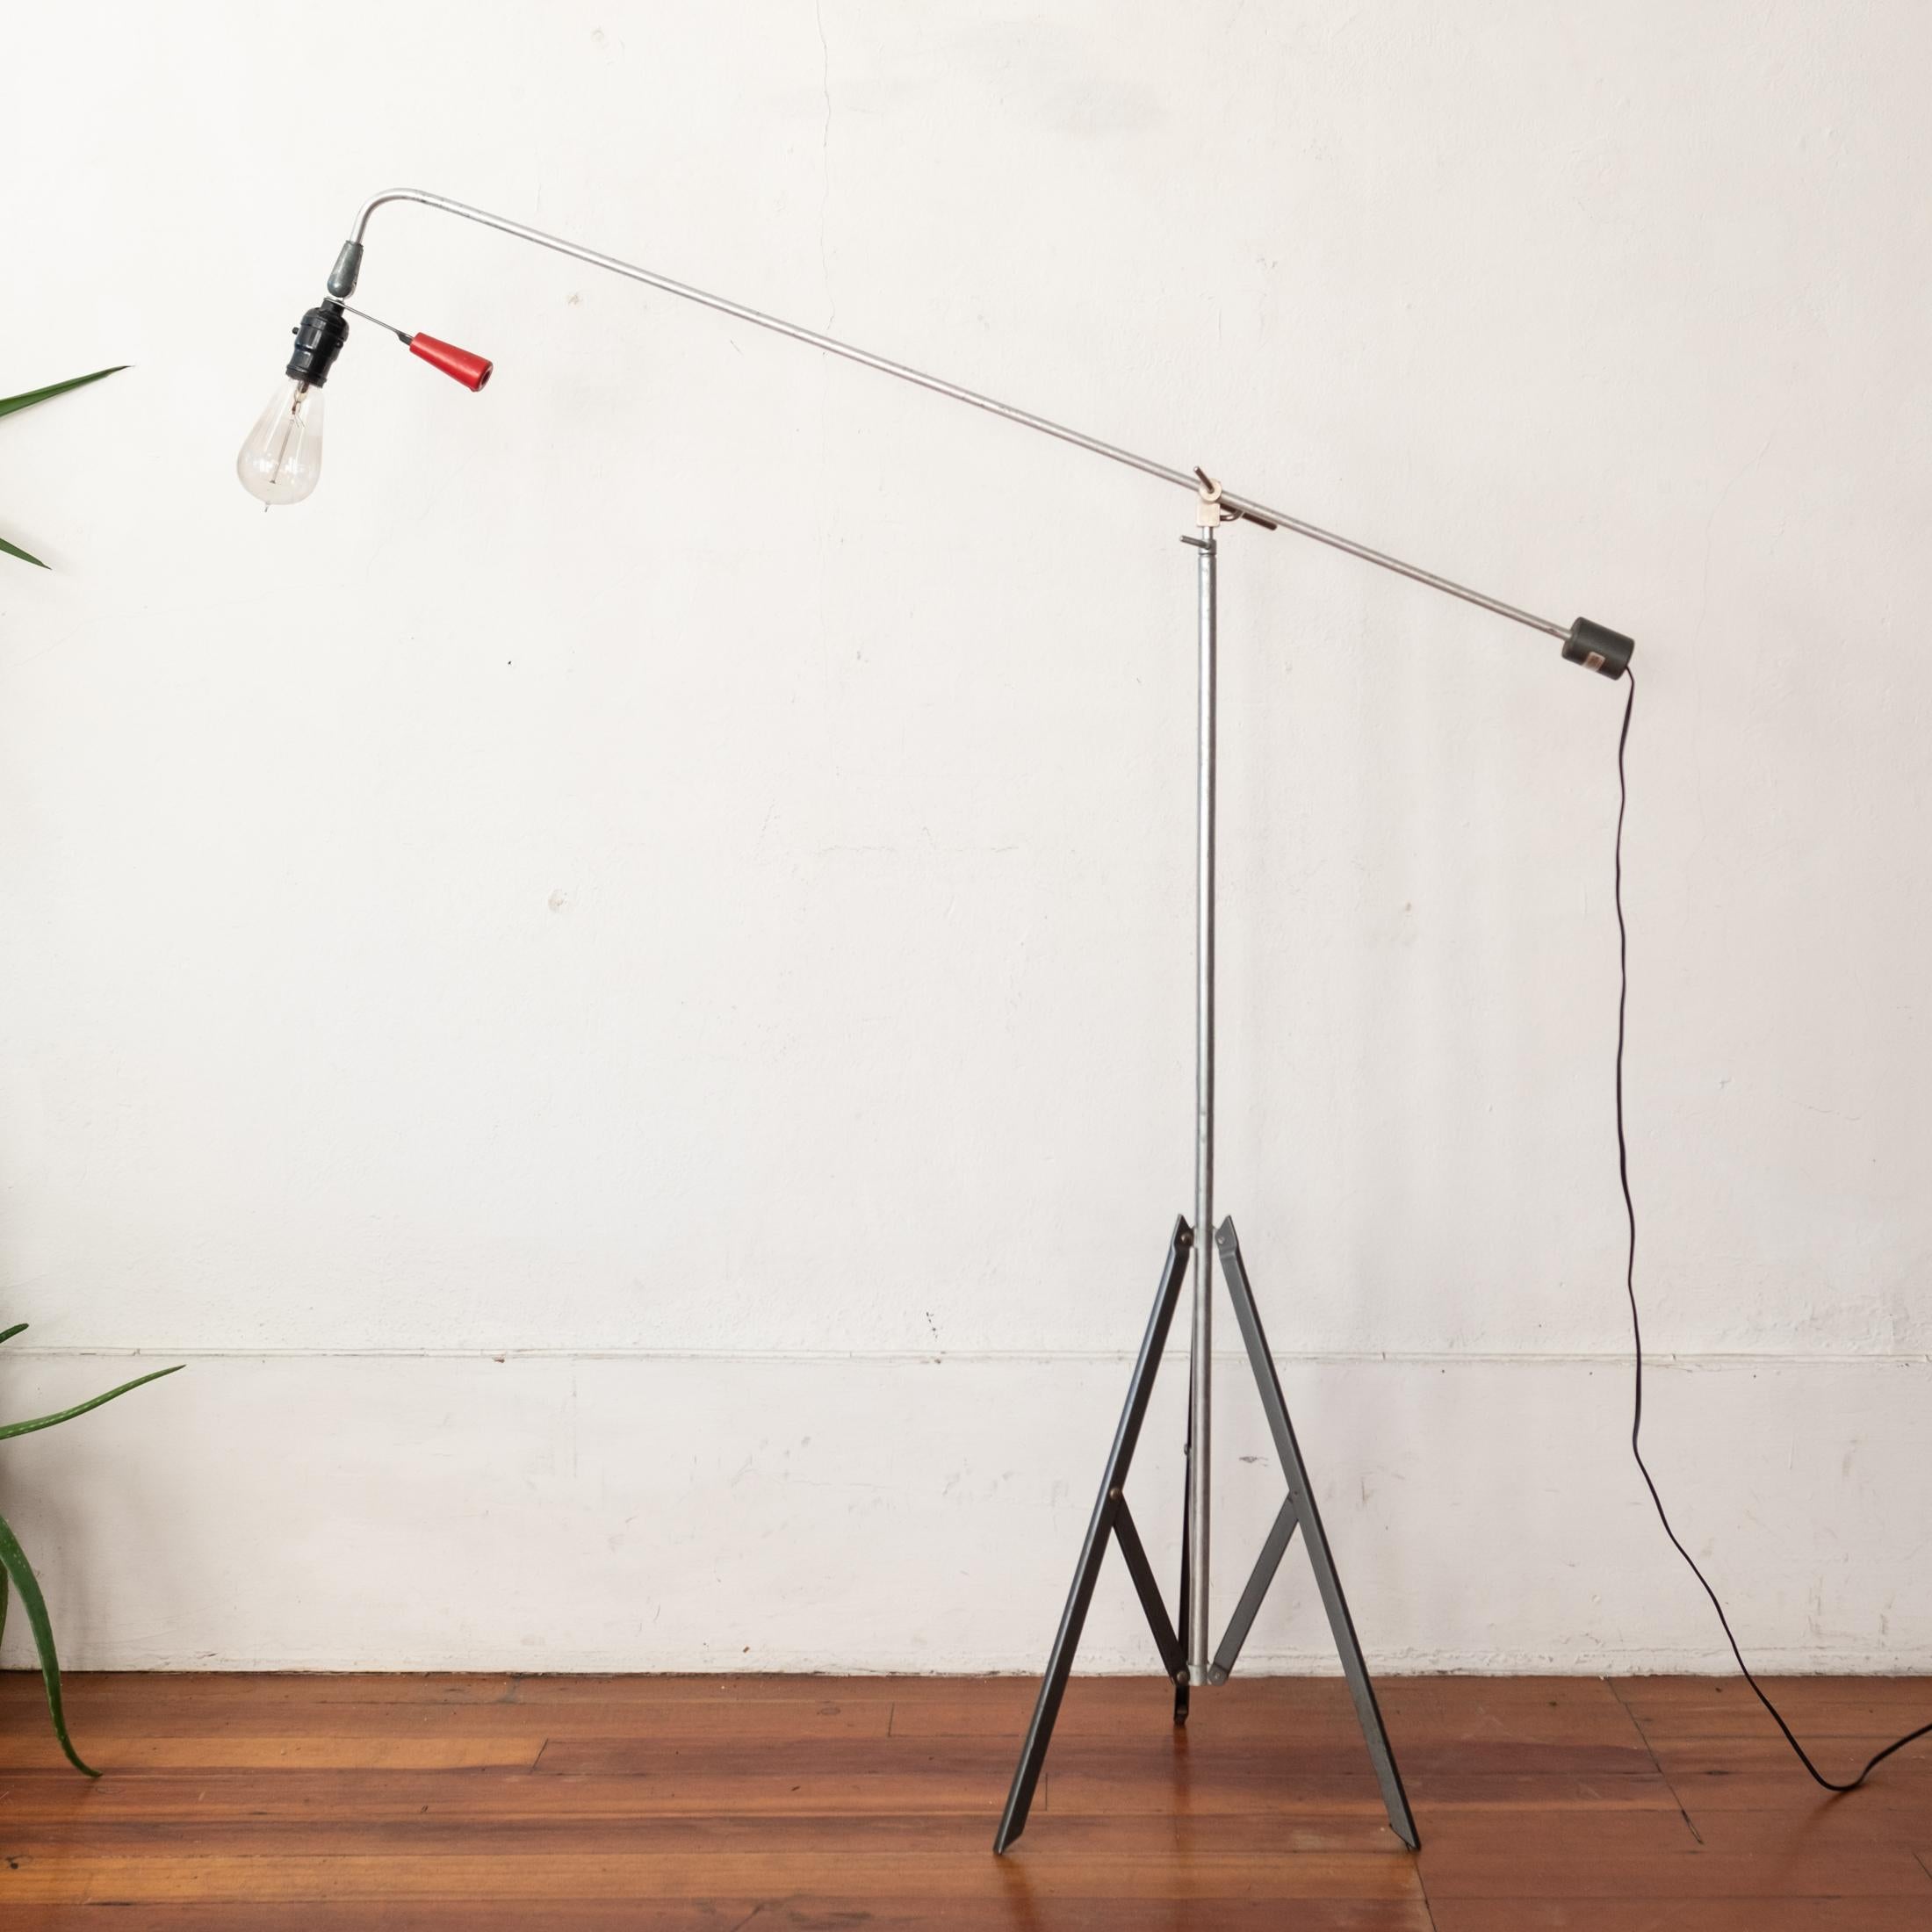 Roland Smith floor lamp by Smith-Victor Corporation USA, c. 1945 Fully adjustable and breaks down for easy storage. 

Nickel-plated steel, aluminum, steel, plastic, lacquered wood

Measures: 43